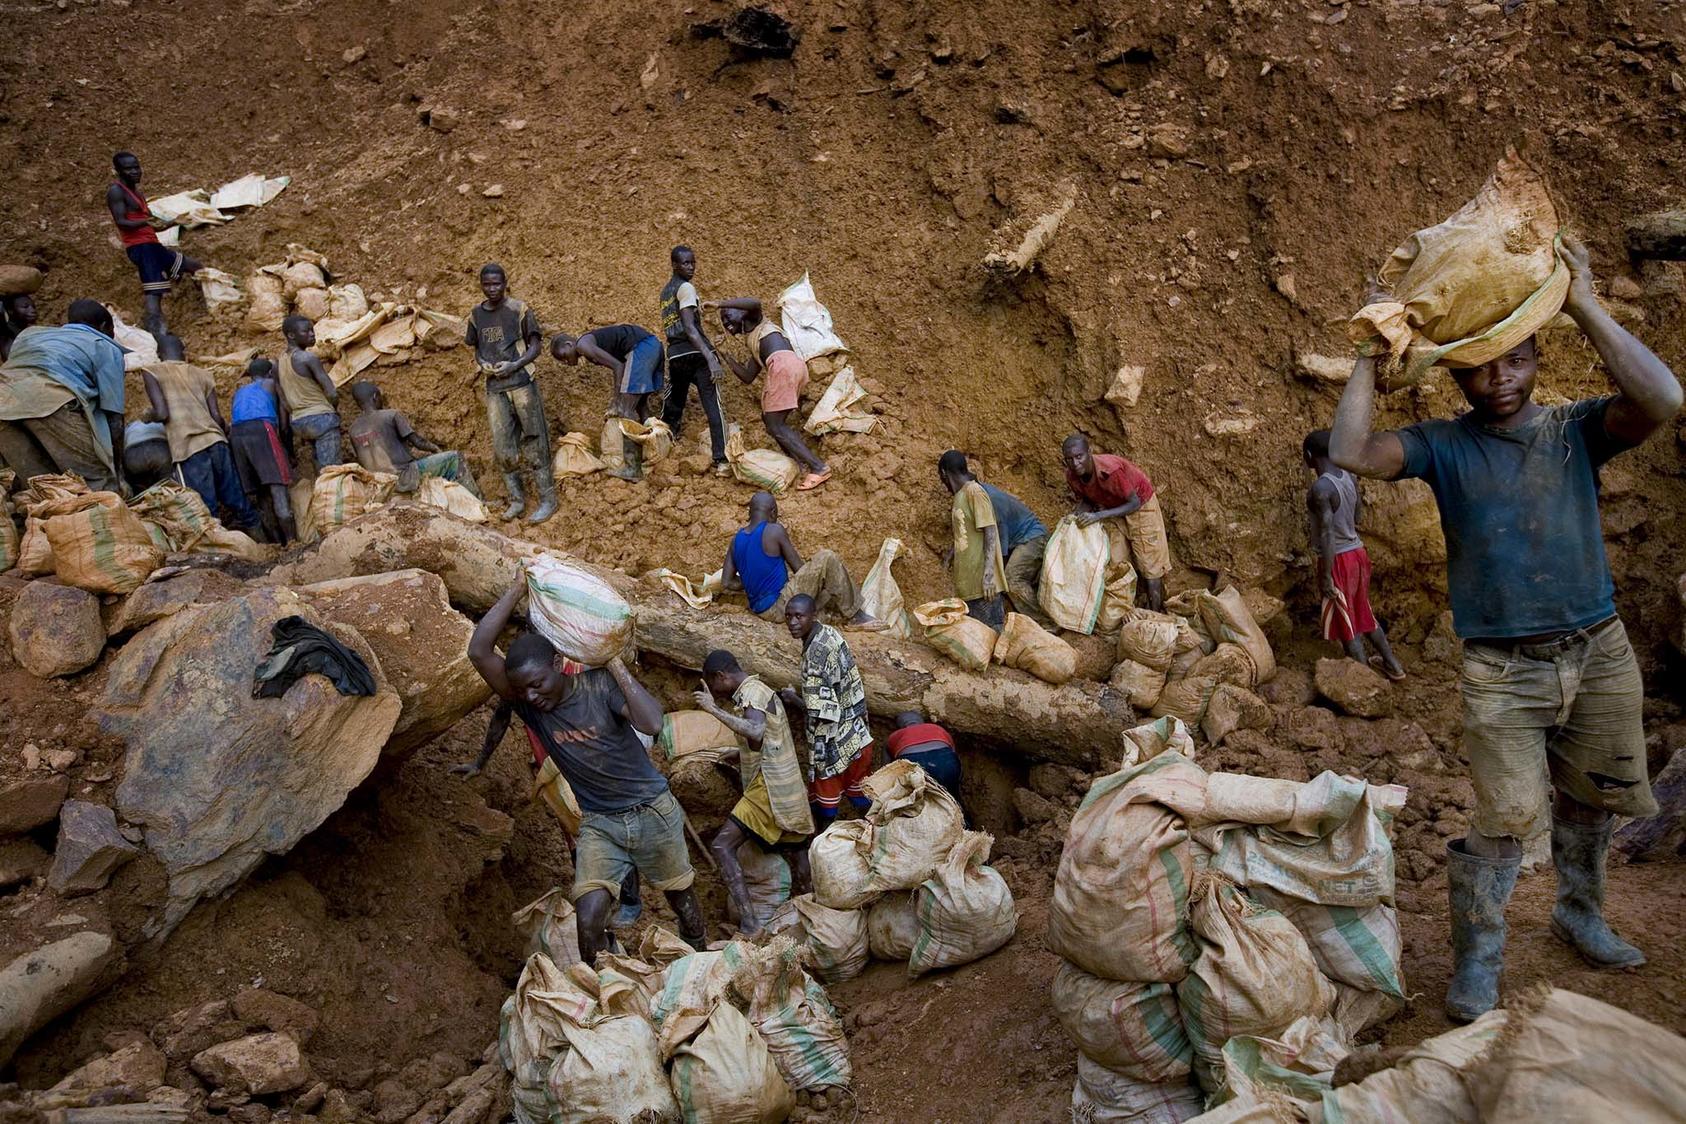 Men dig in the Bisie tin mine in the Democratic Republic of the Congo. The mine, like many, has been the object of conflict, with residents suffering from the violence and benefiting little from the mine’s revenues. (Johan Spanner/The New York Times)